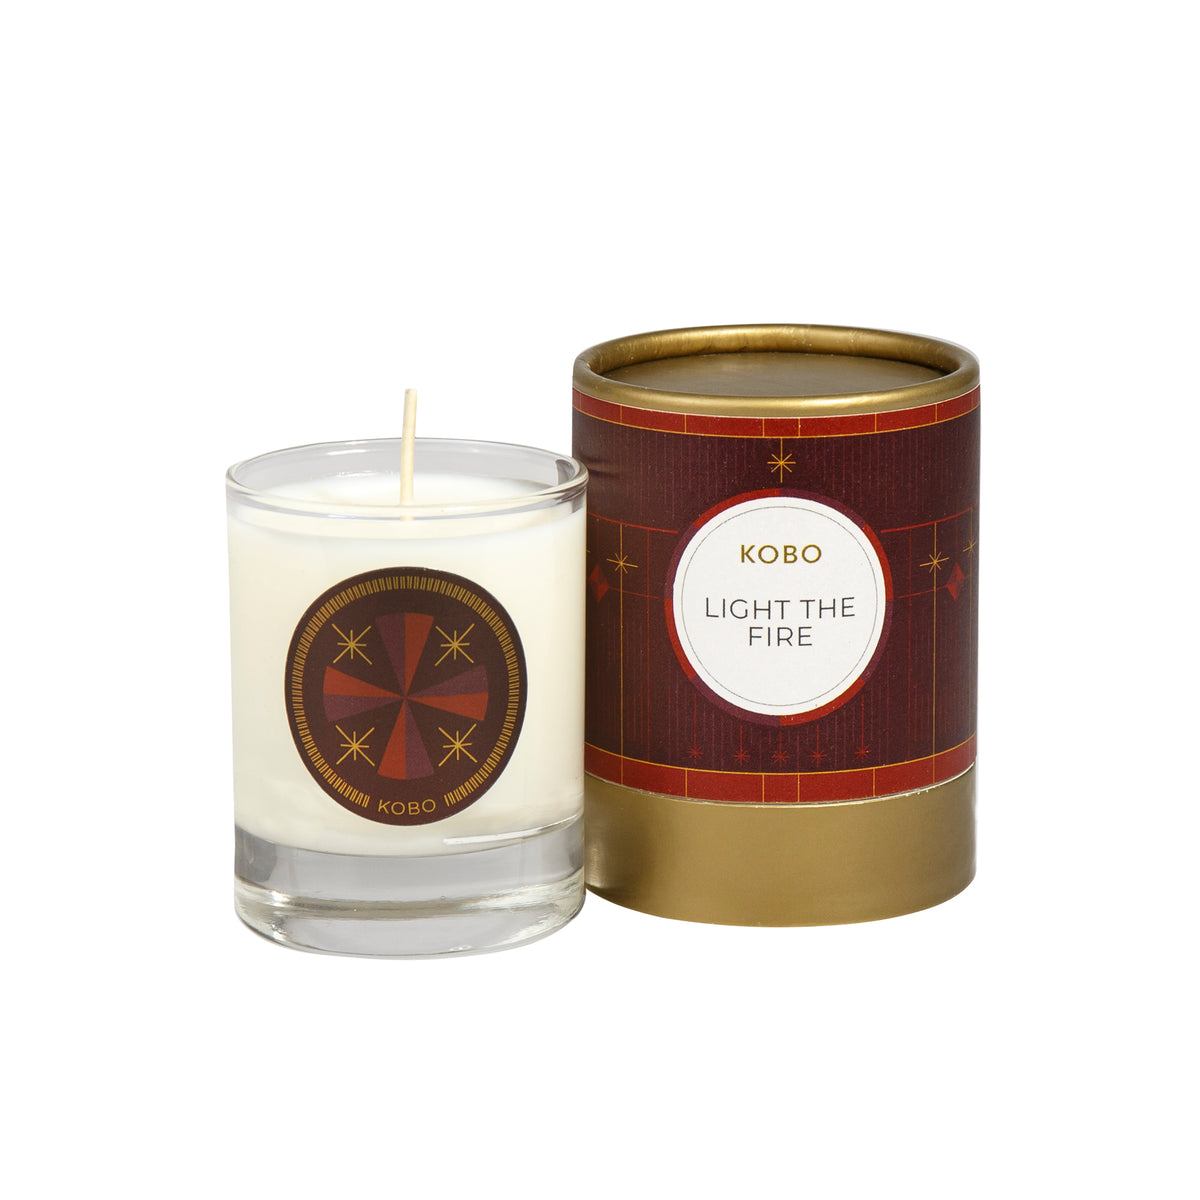 Primary Image of Light The Fire Votive Candle